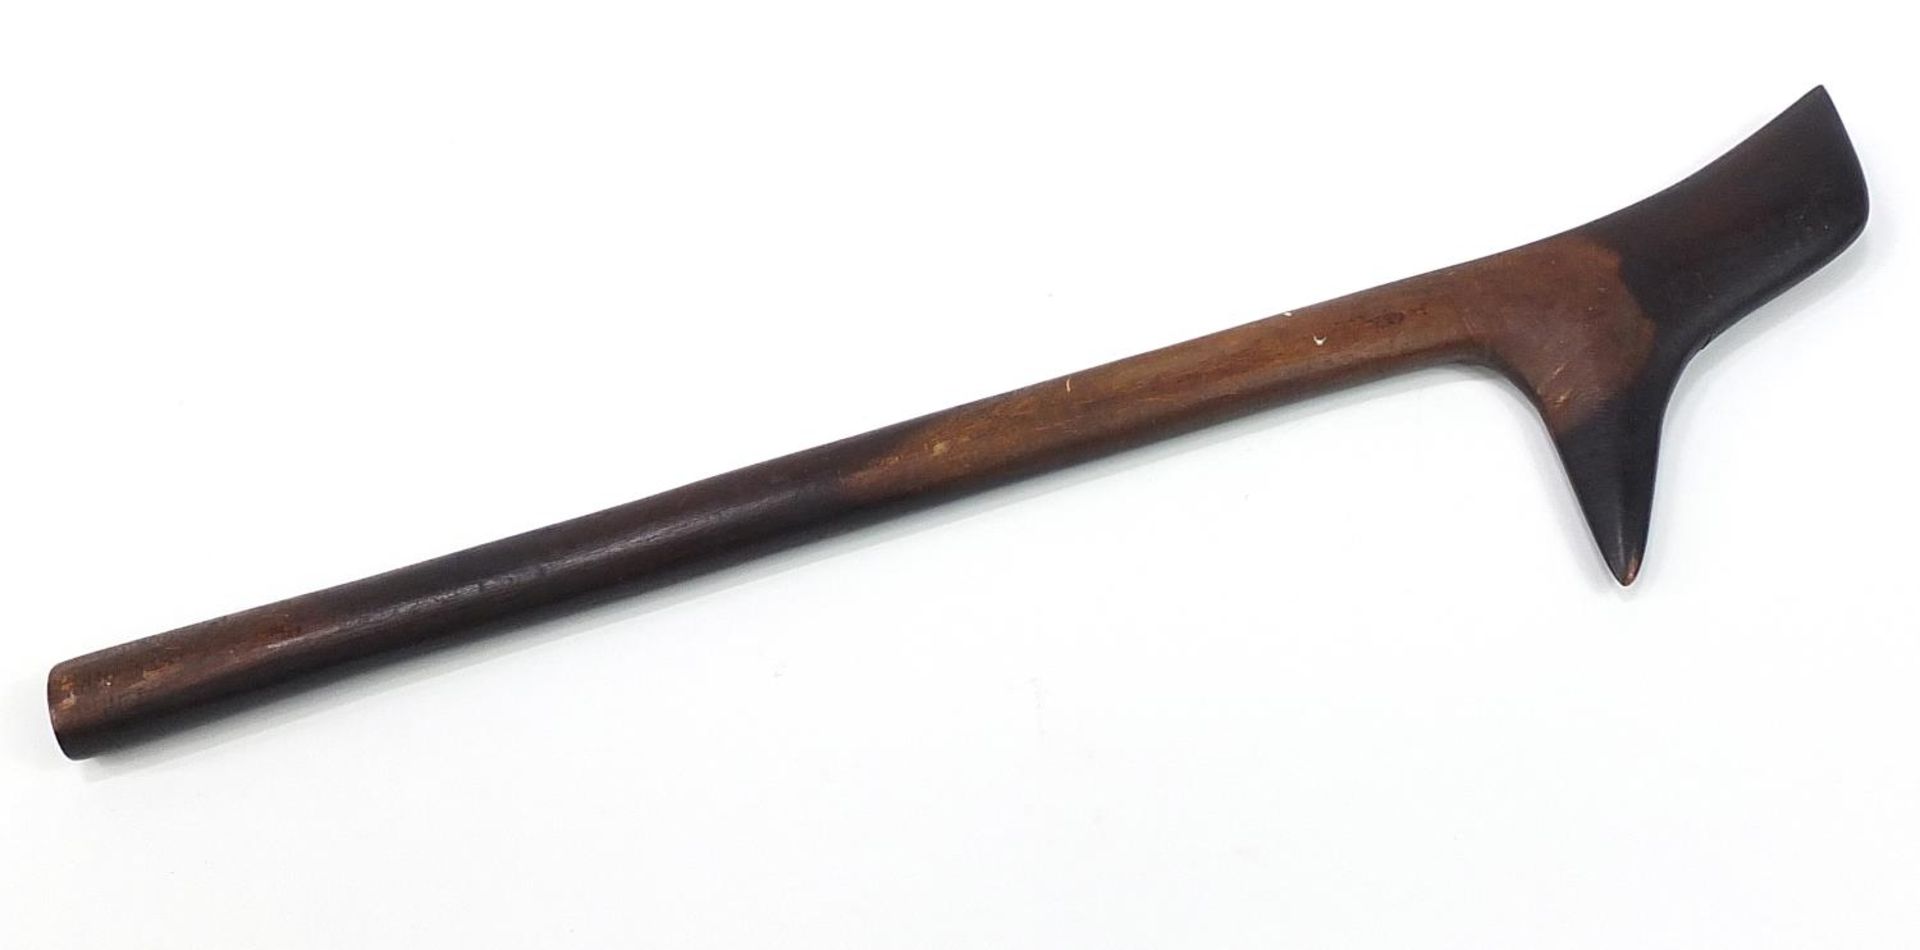 Tribal interest carved wood club, possibly Fijian or Aboriginal, 67.5cm in length